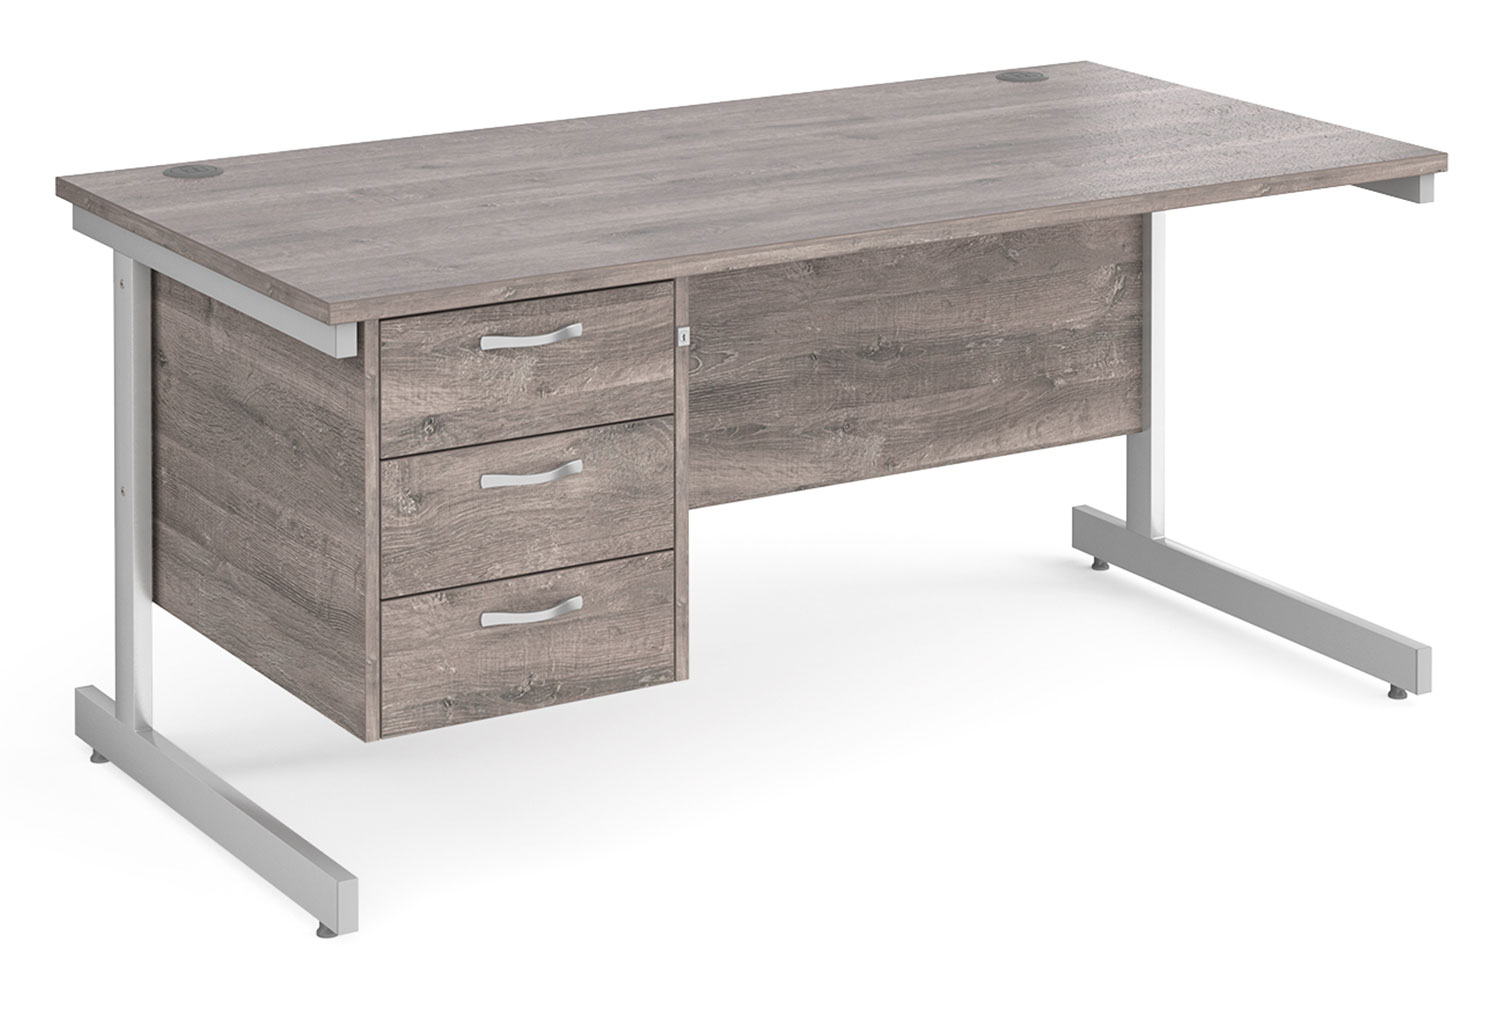 Thrifty Next-Day Rectangular Office Desk 3 Drawers Grey Oak, 160wx80dx73h (cm), Express Delivery